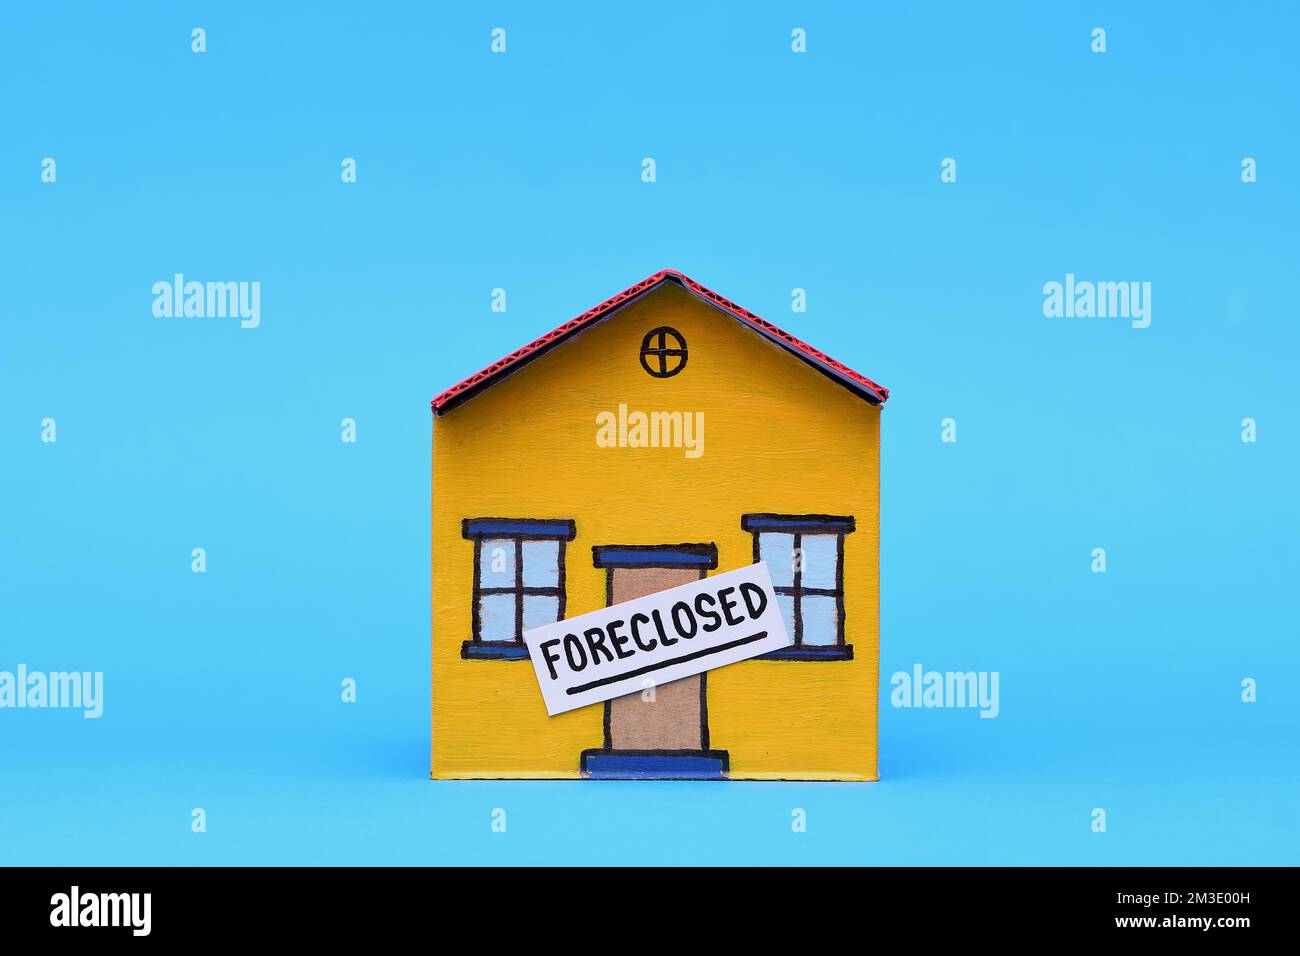 A yellow and red toy cardboard house with a Foreclosed sign on the door in the middle of frame isolated on a light blue background Stock Photo